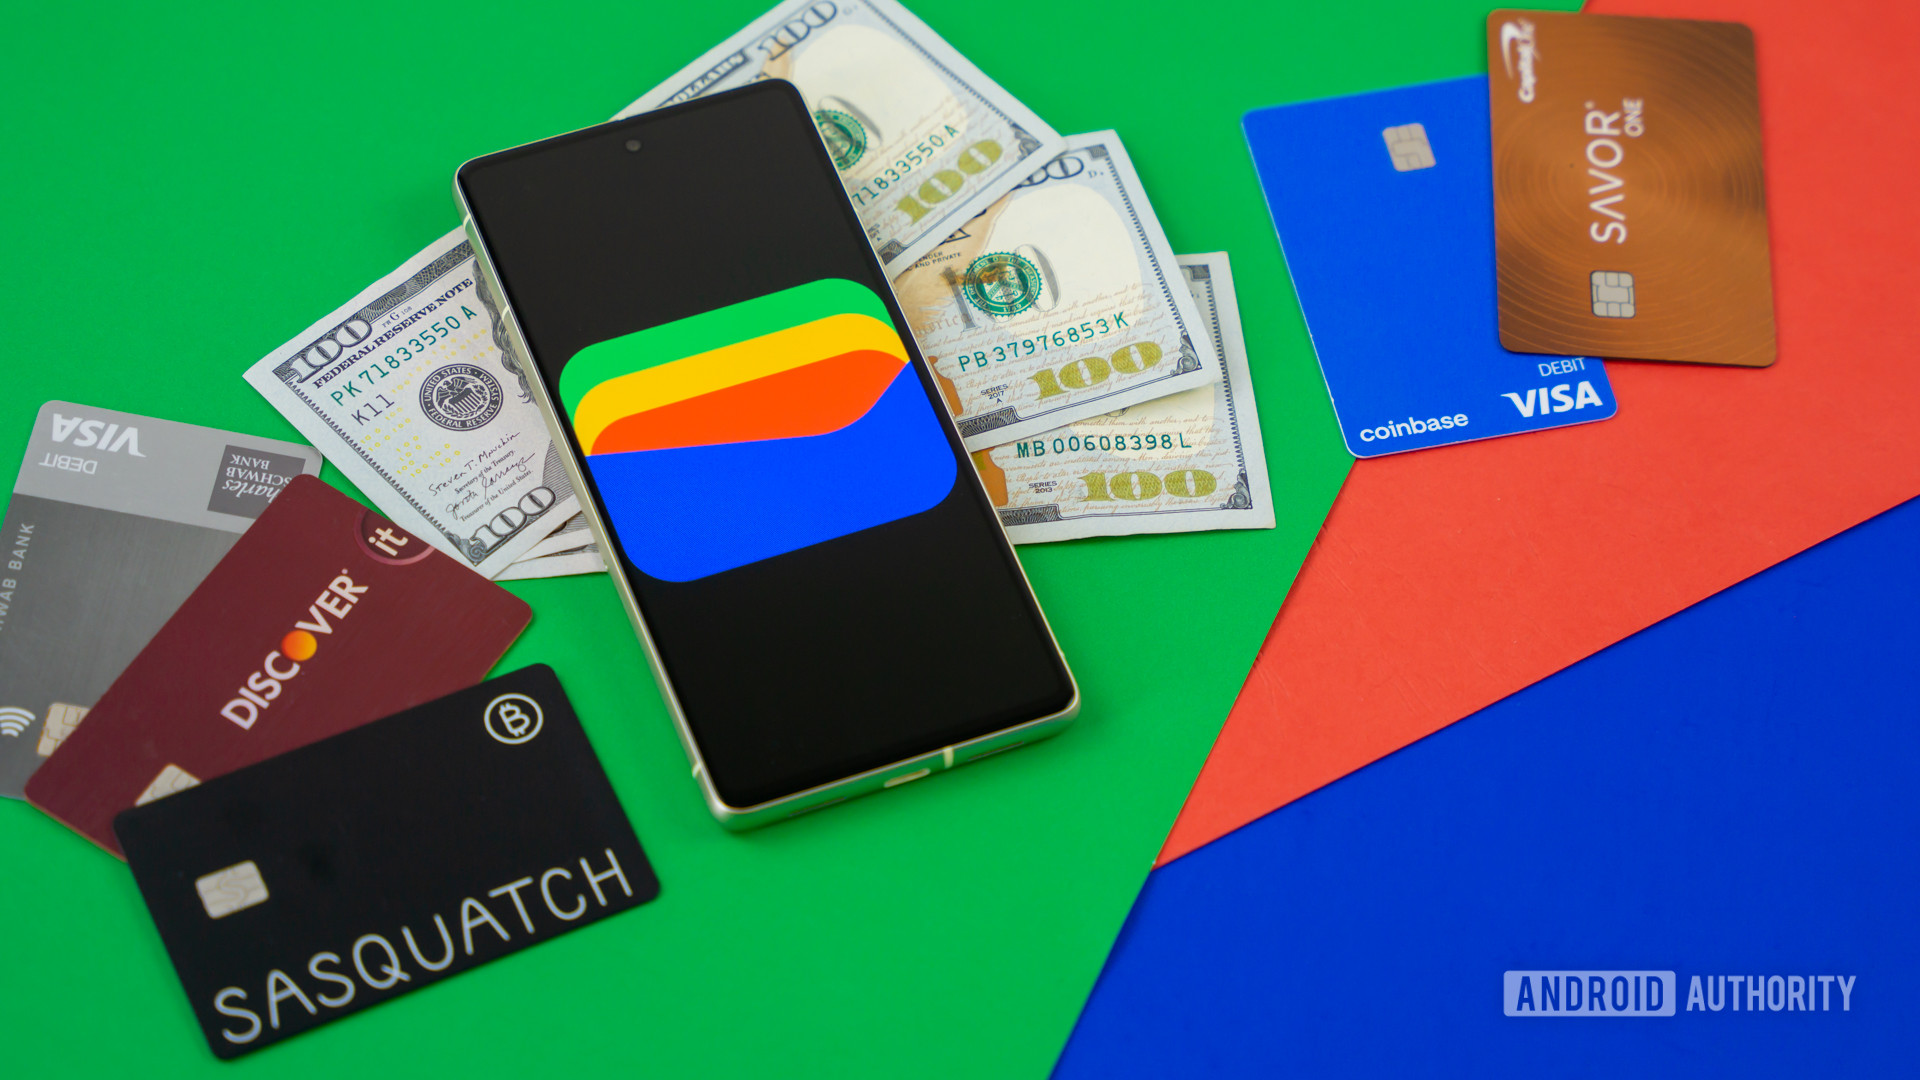 Google Wallet payments are getting annoying, but Android 15 might fix that